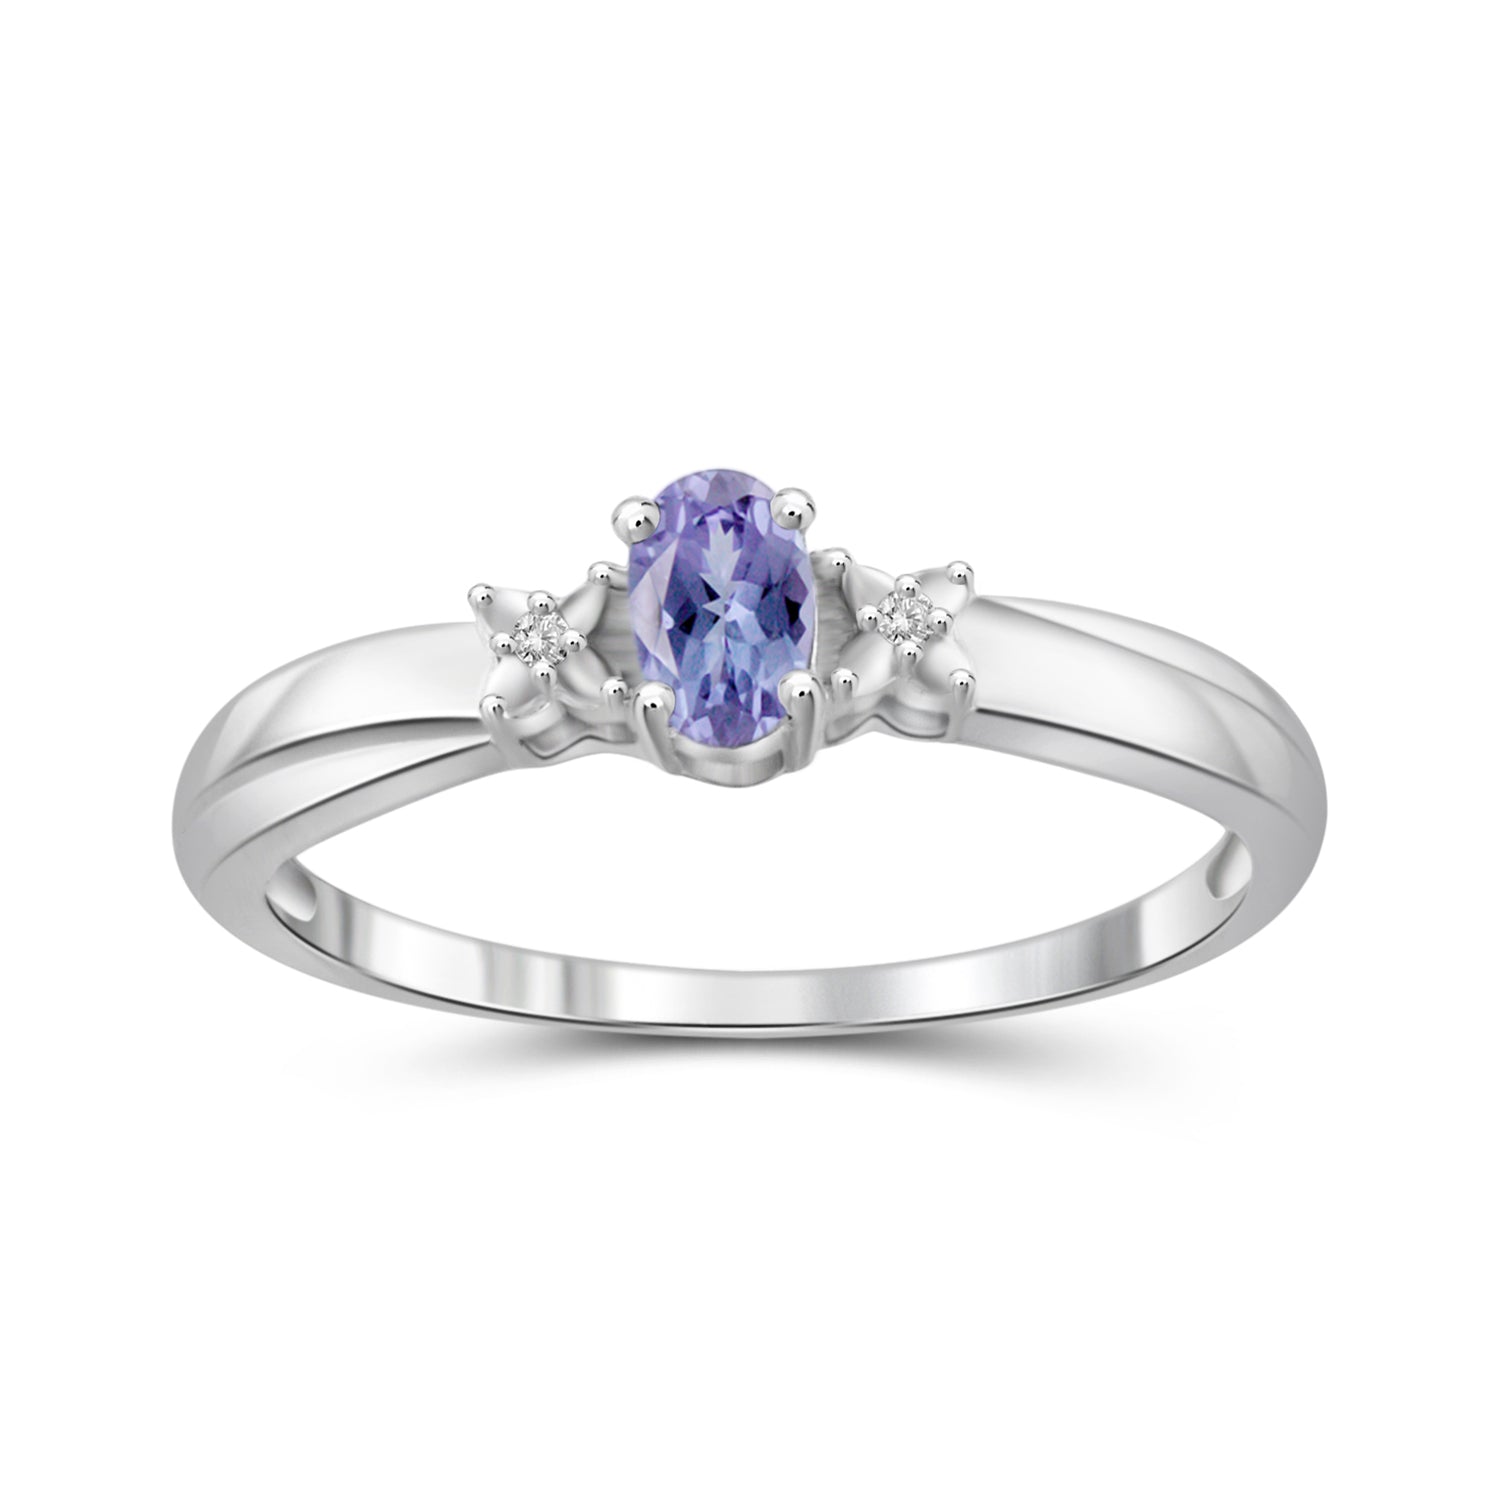 Buy Blue Tanzanite Gemstone Ring, 925 Silver Sterling Ring, December Birthstone  Ring, Blue Stone Ring, Tanzanite Jewellery Set, Engagement Ring Online in  India - Etsy